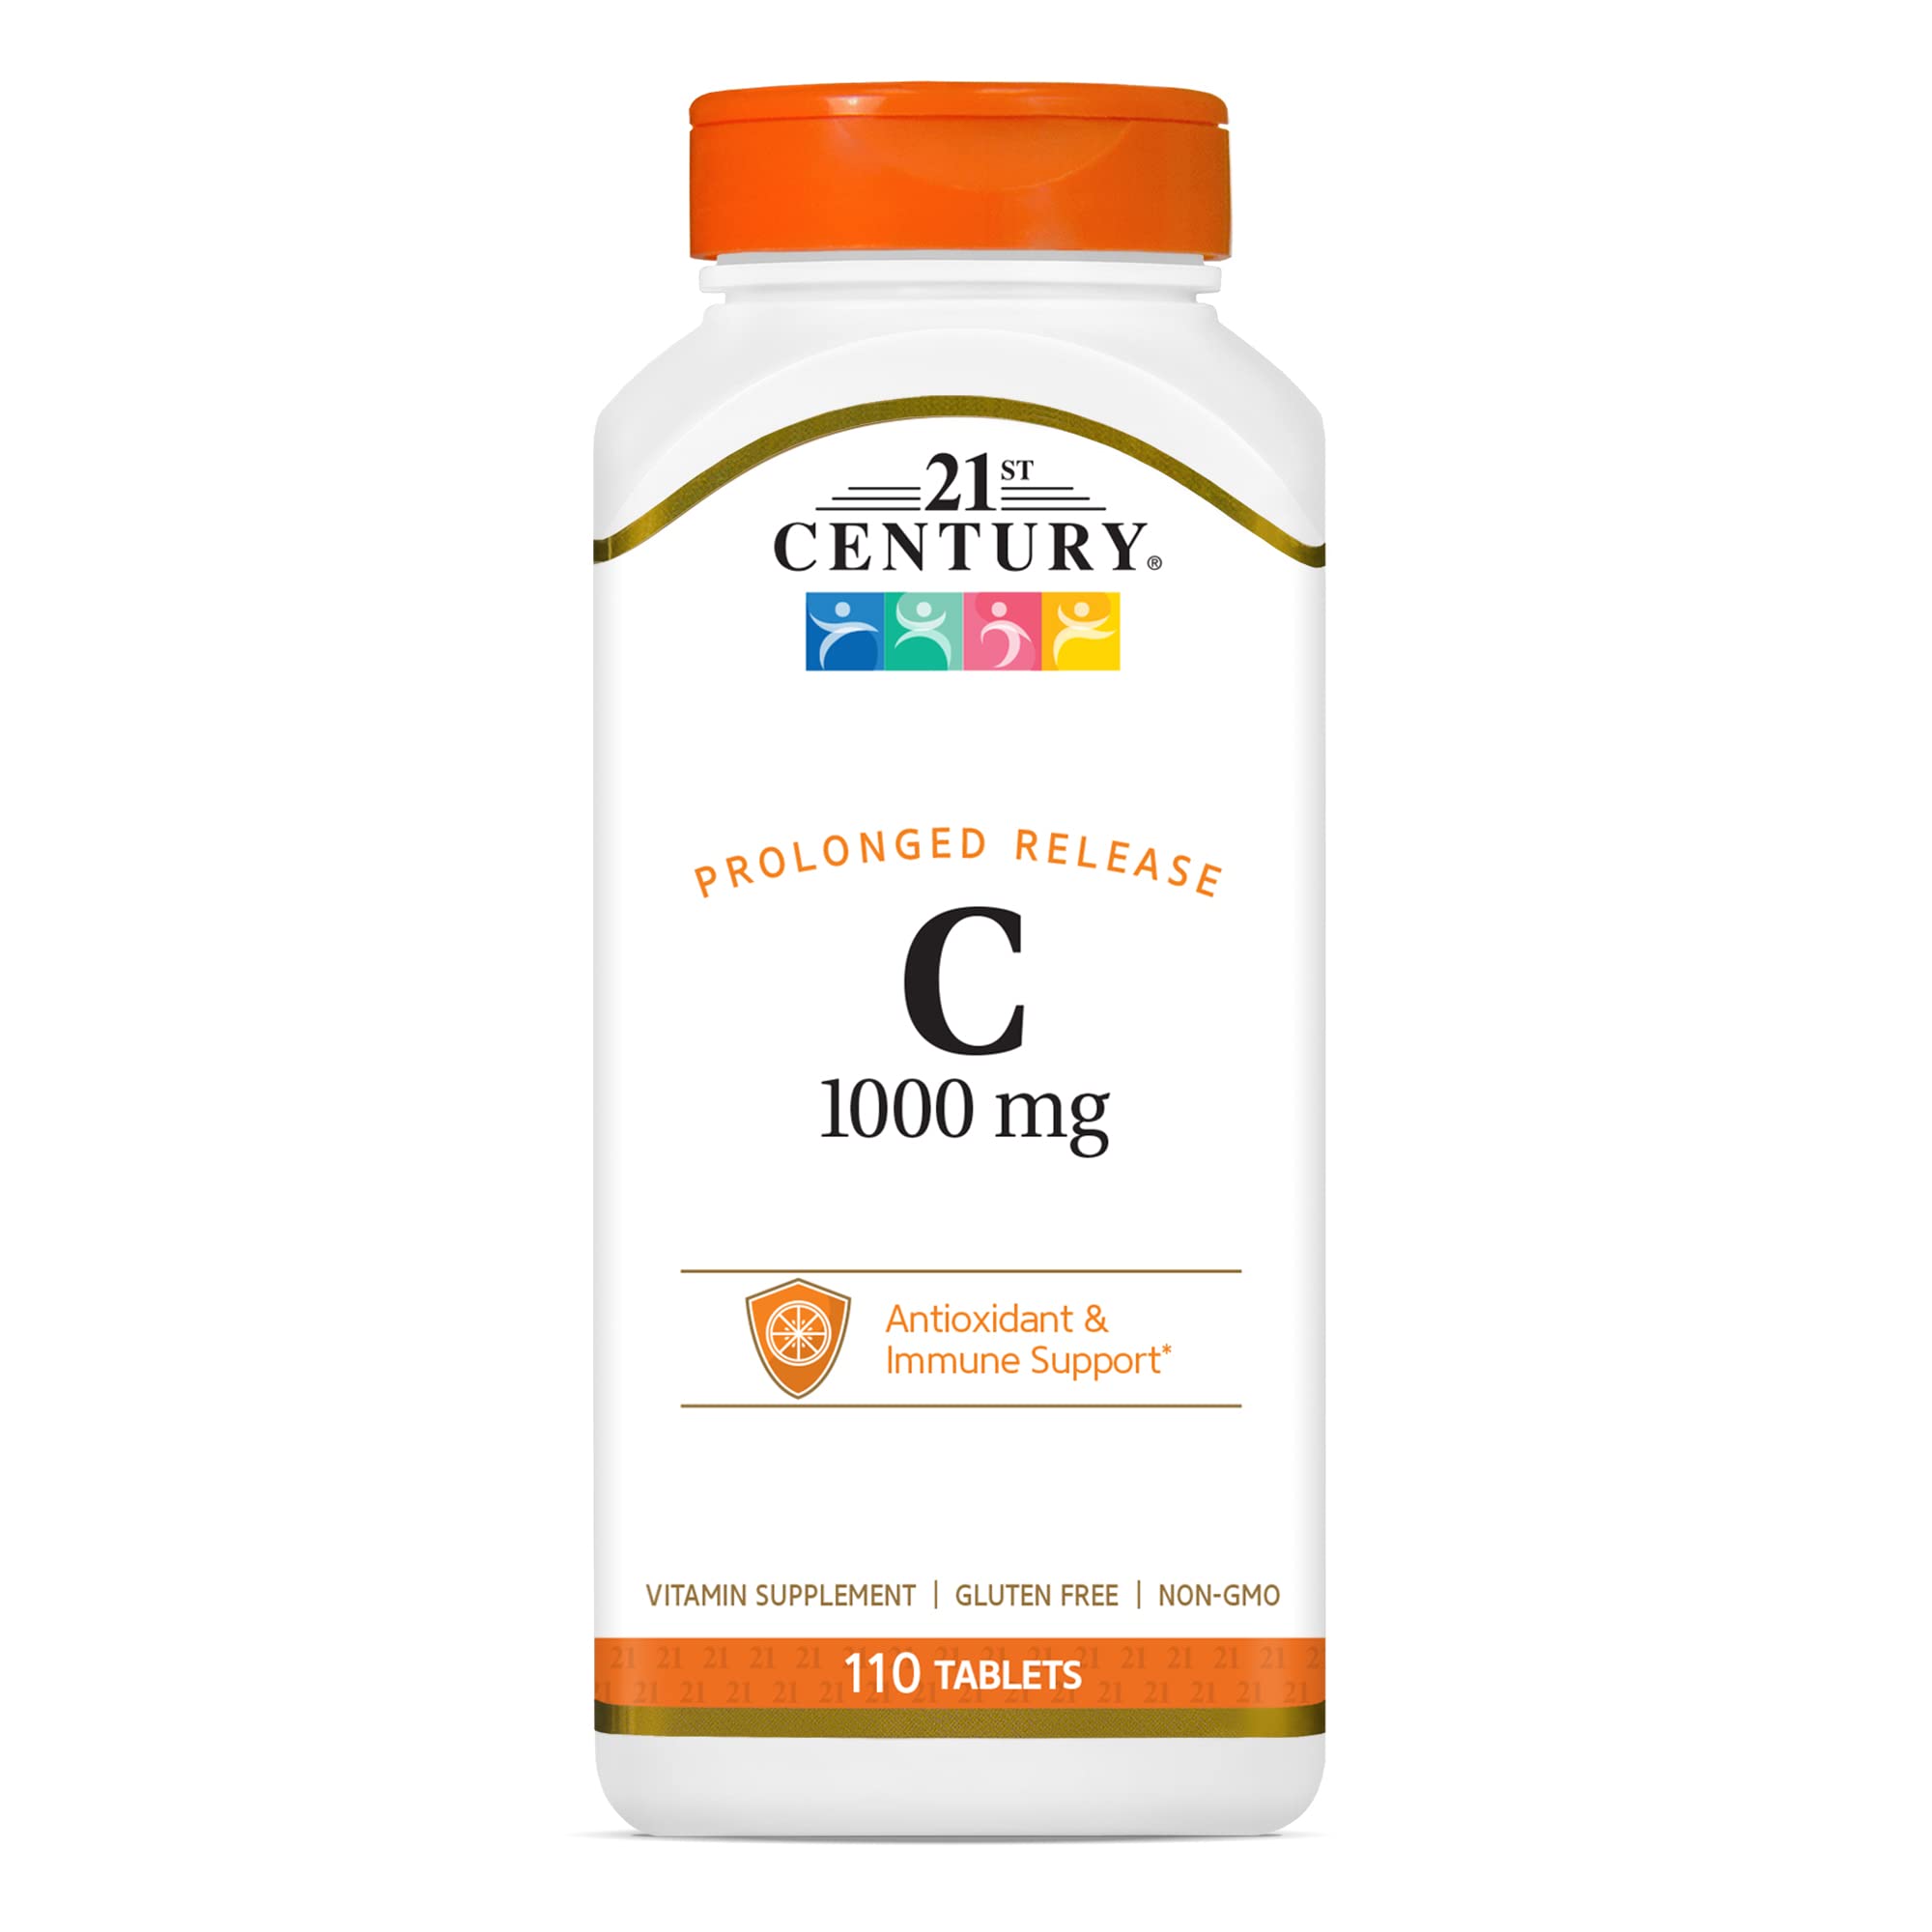 21st Century C 1000 mg Prolonged Release Tablets 110 Count